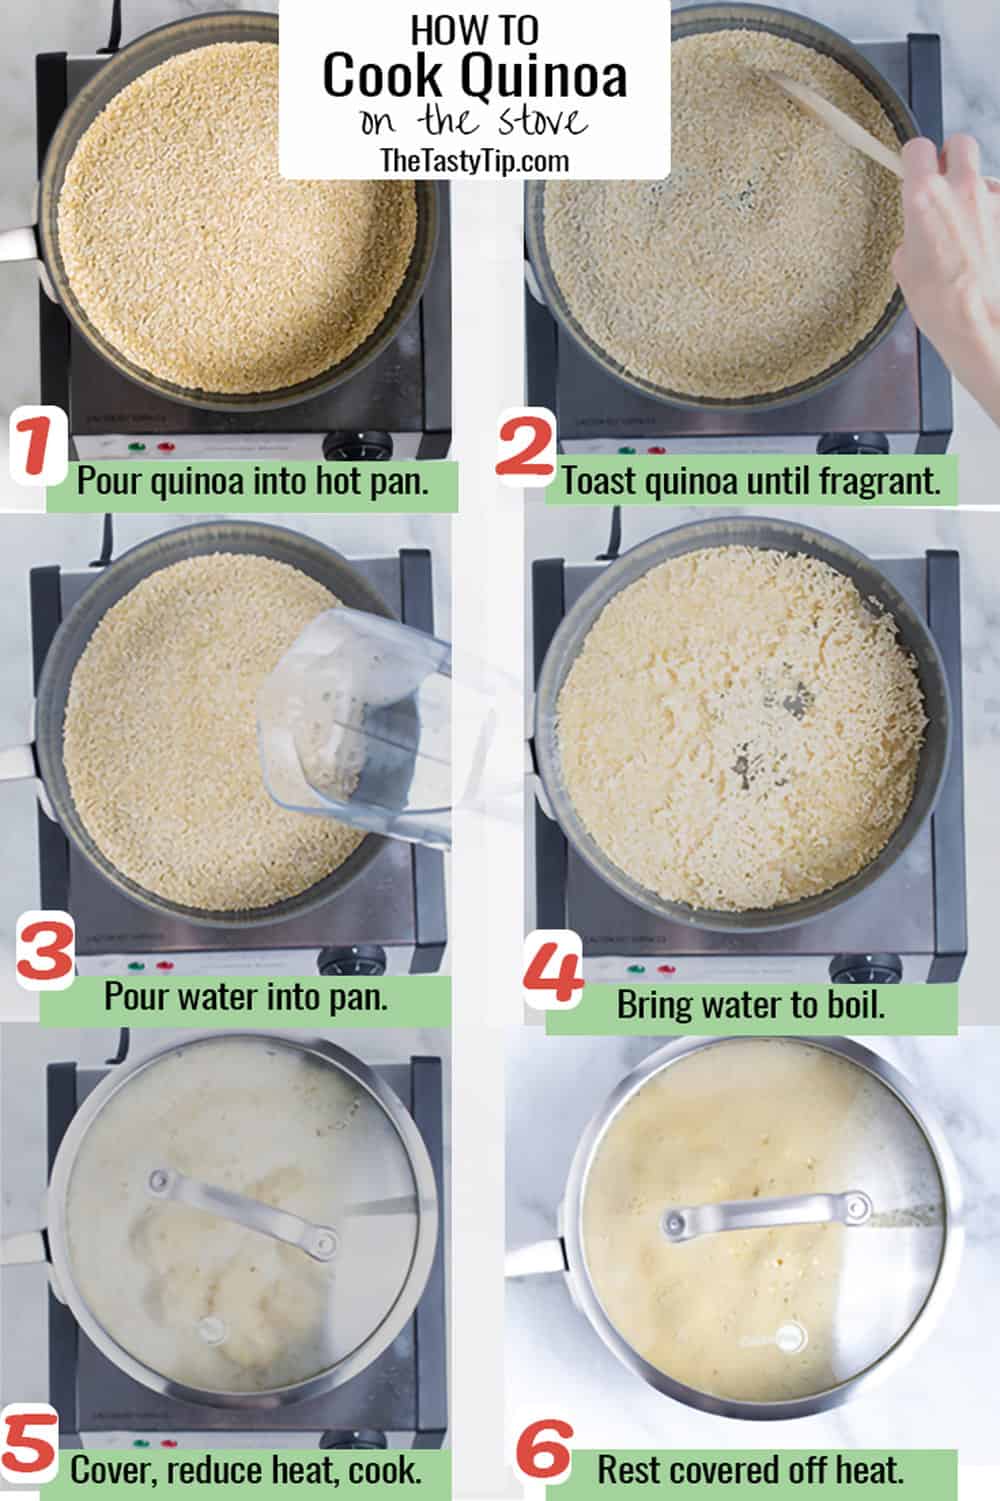 steps to cook quinoa on the stove